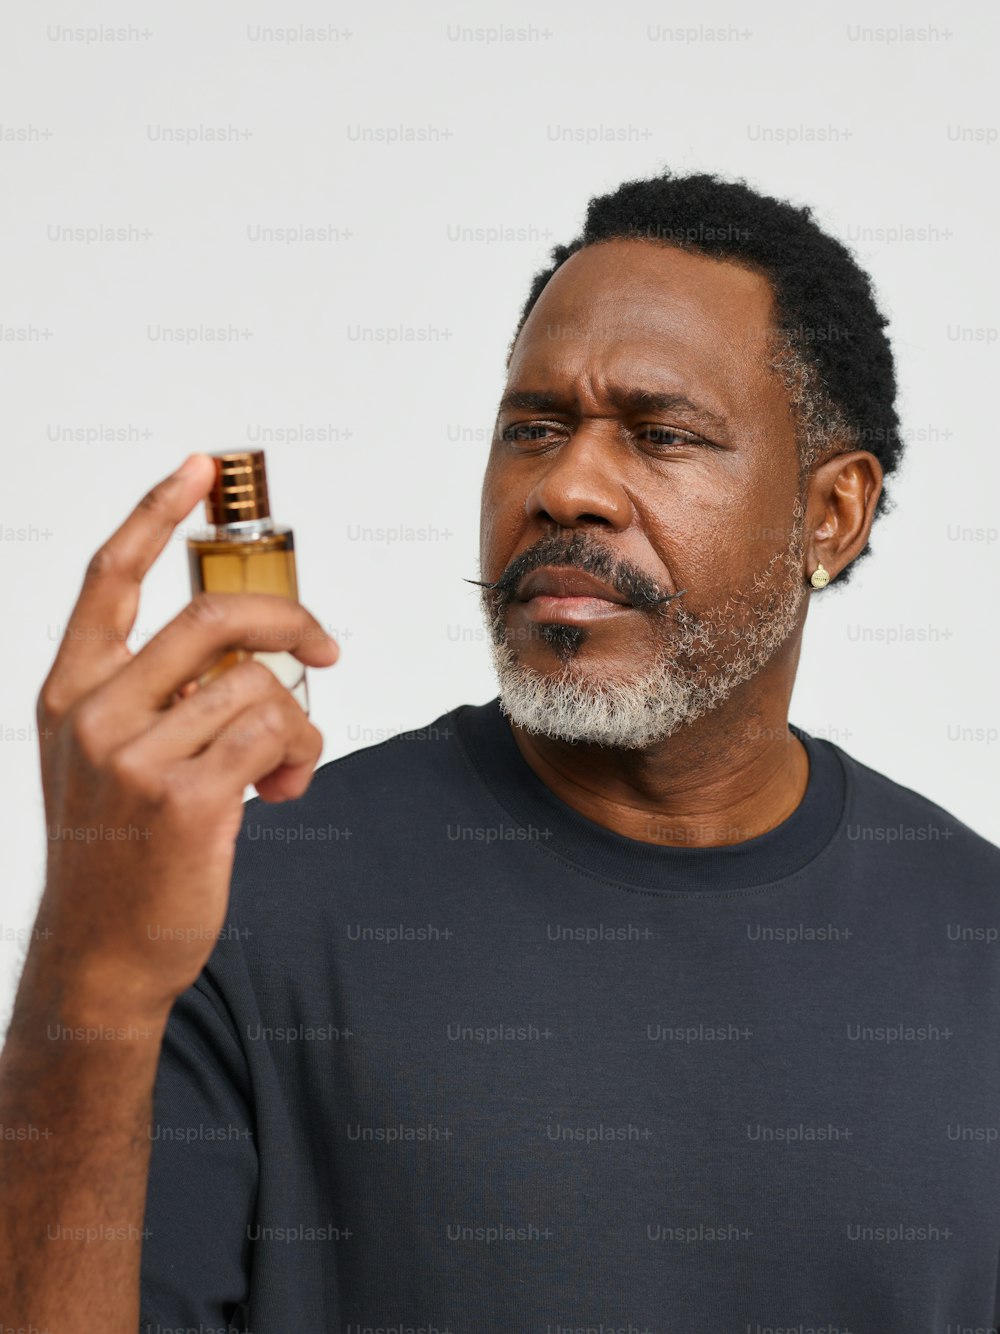 a man holding a bottle of perfume in his hand